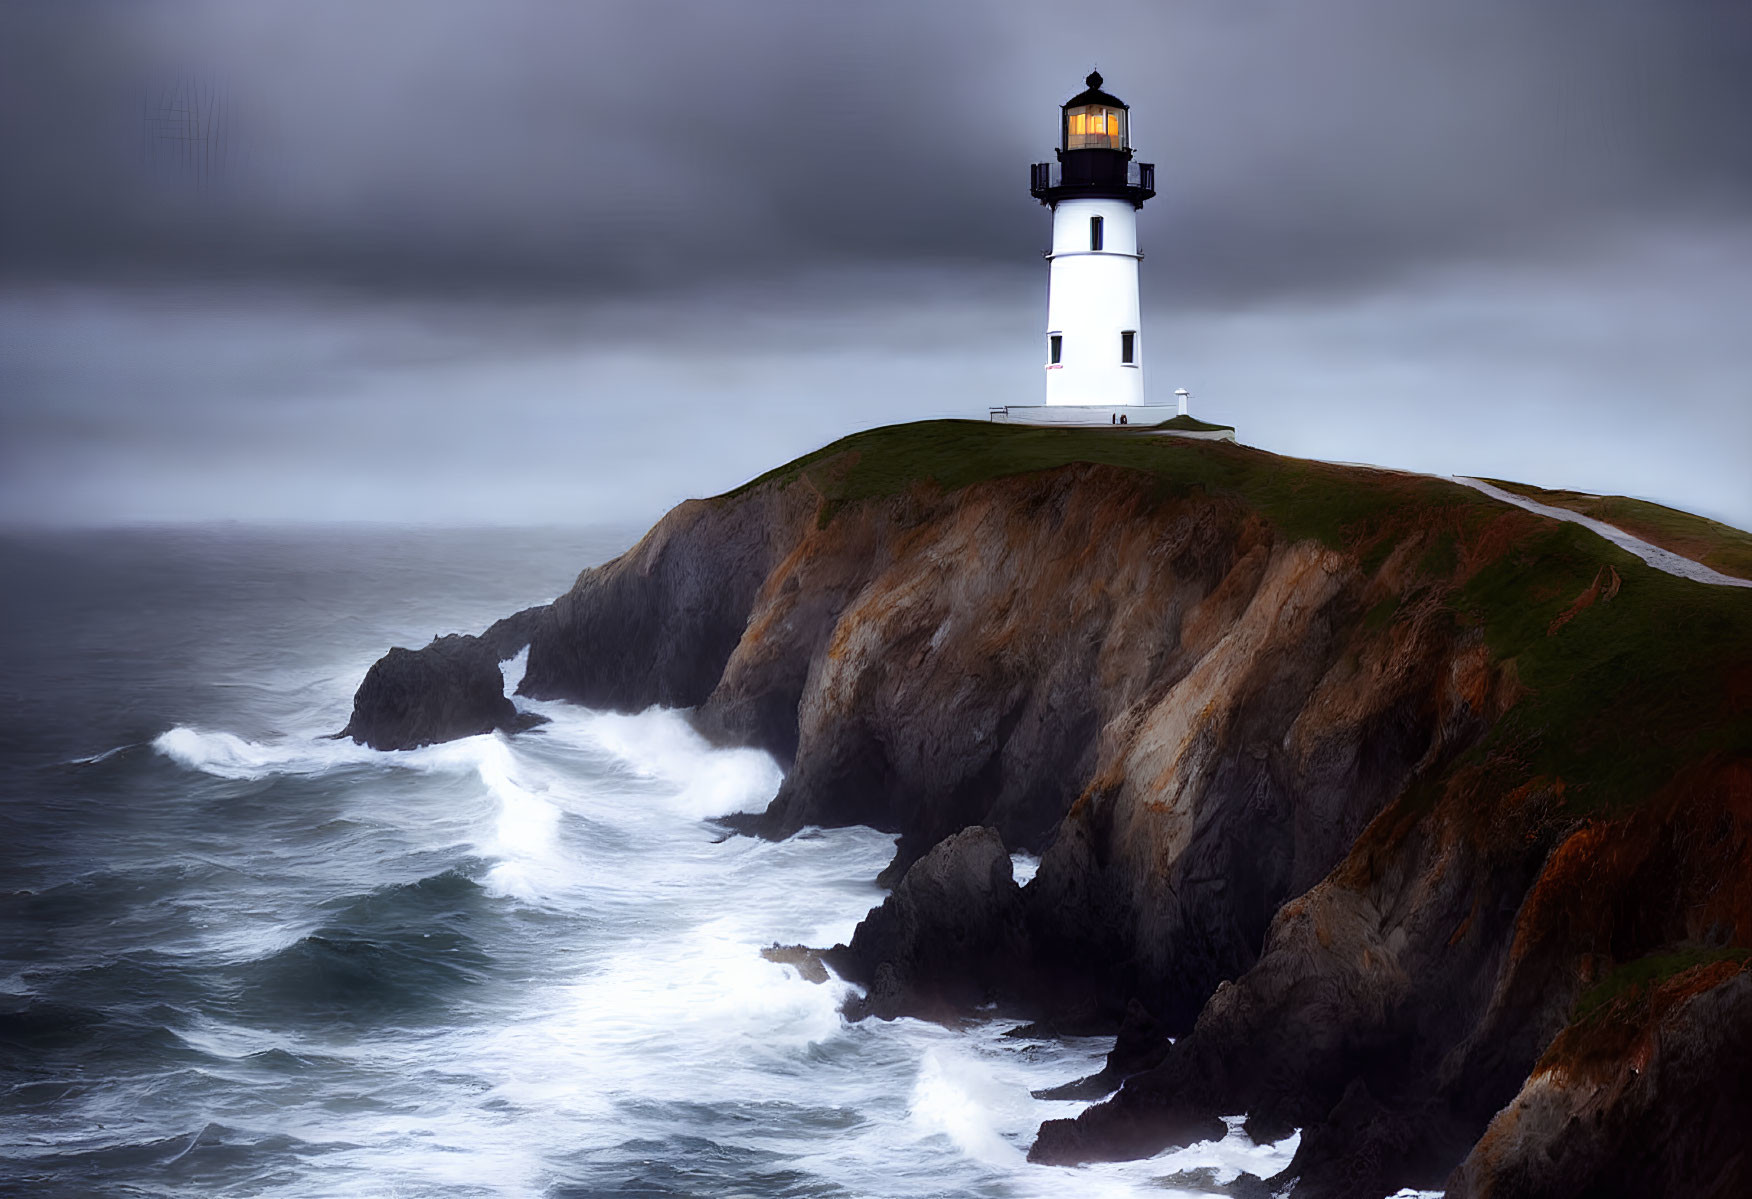 Rugged cliffs with a lighthouse and crashing waves under overcast sky